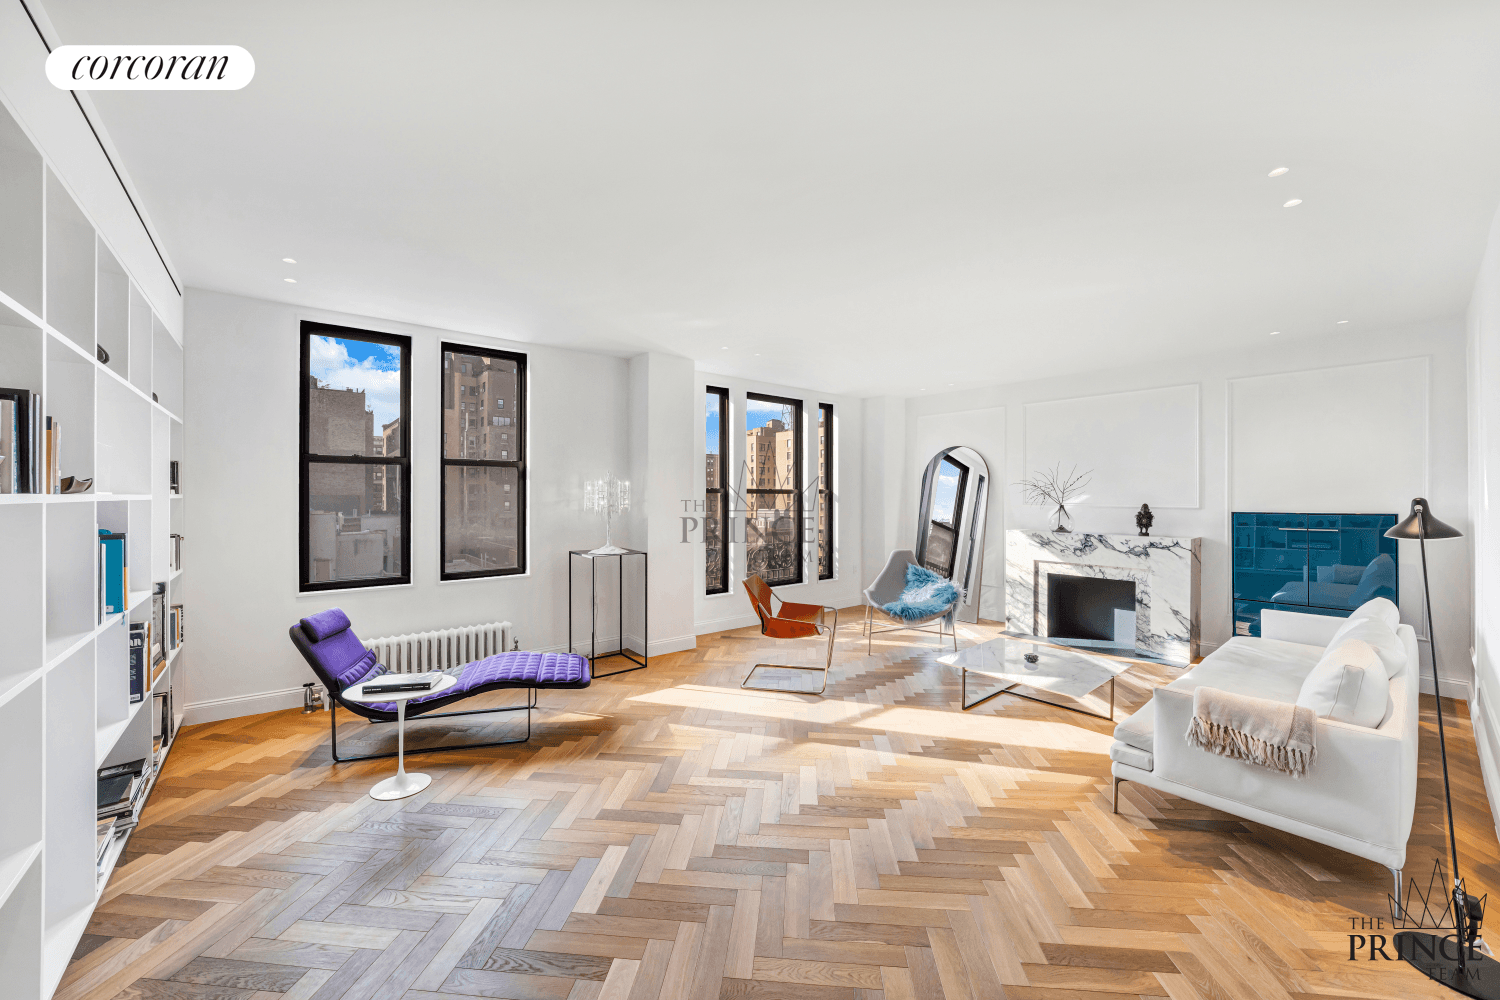 Welcome to a timeless blend of Parisian elegance and Italian sophistication in this newly renovated apartment designed by S4architecture, an Italian run architectural firm.